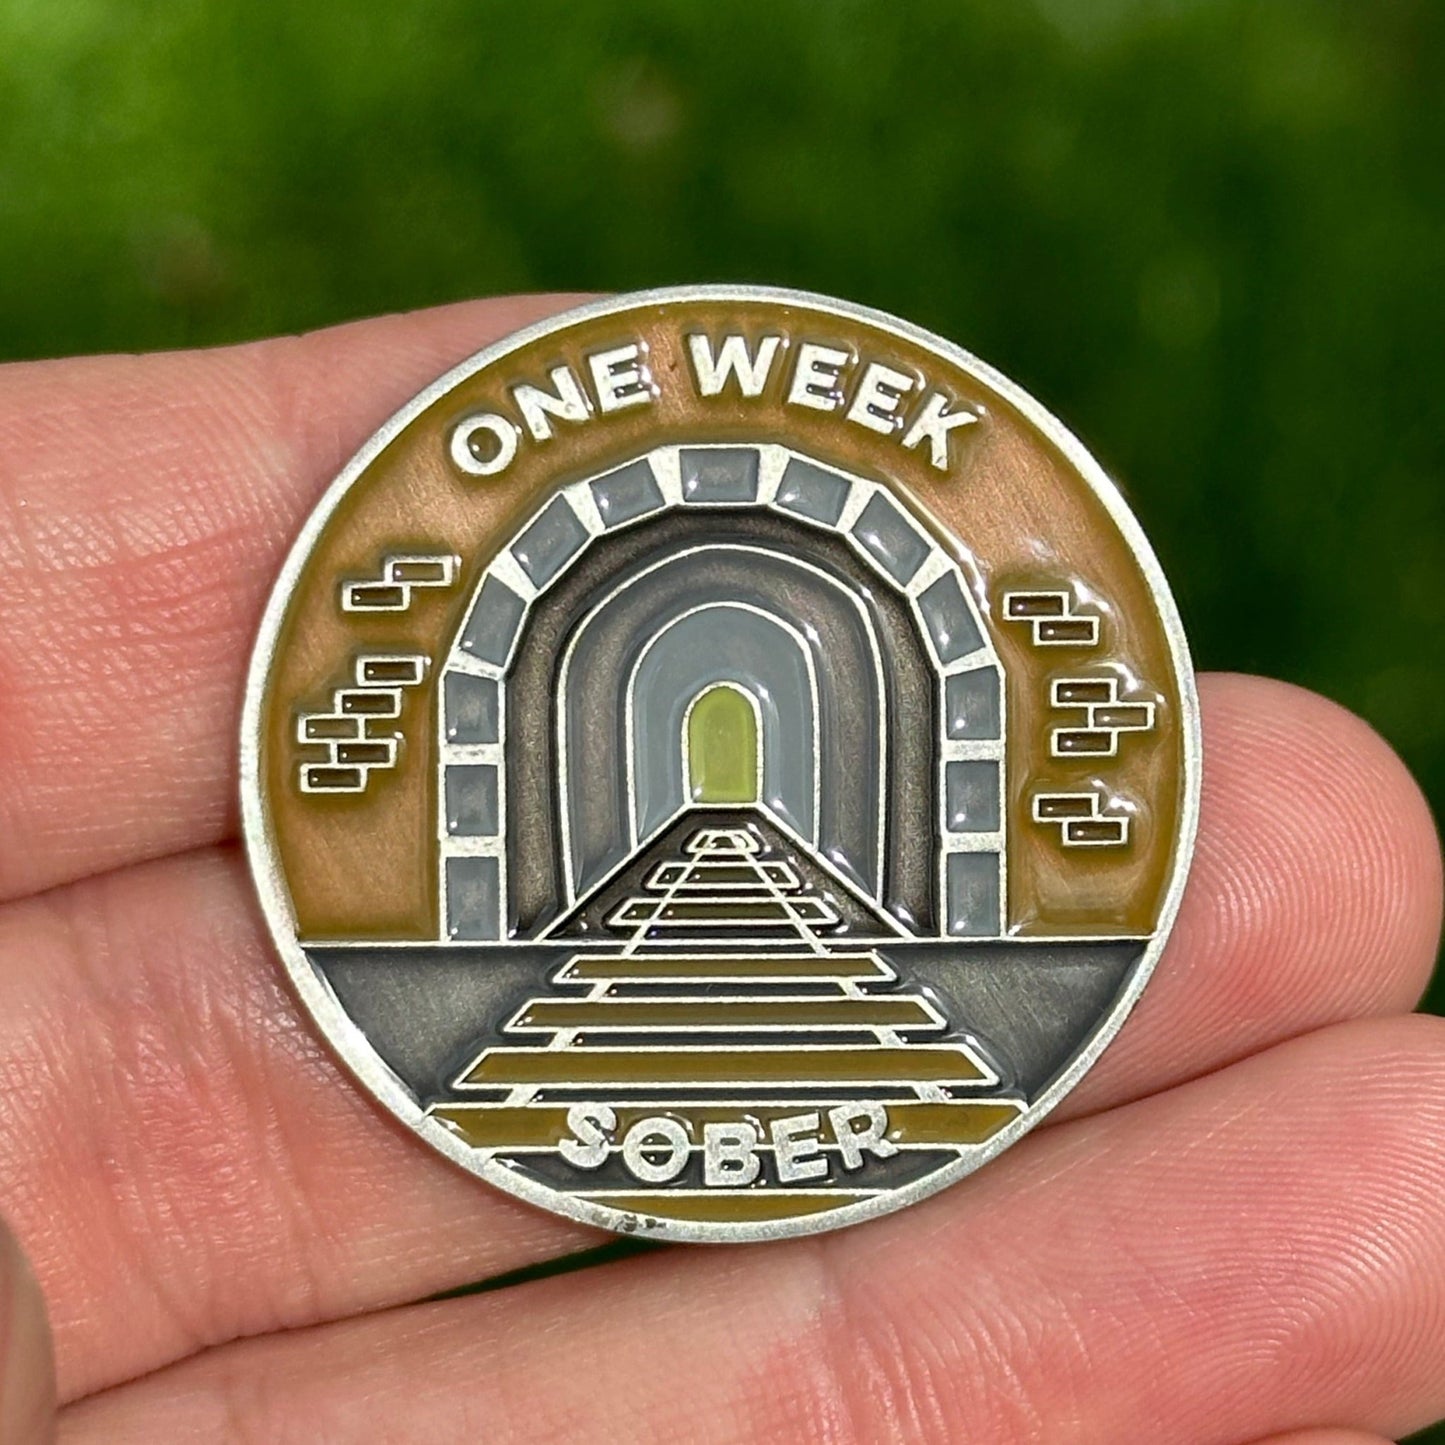 One Week Sober sobriety coin - The Achieve Mint